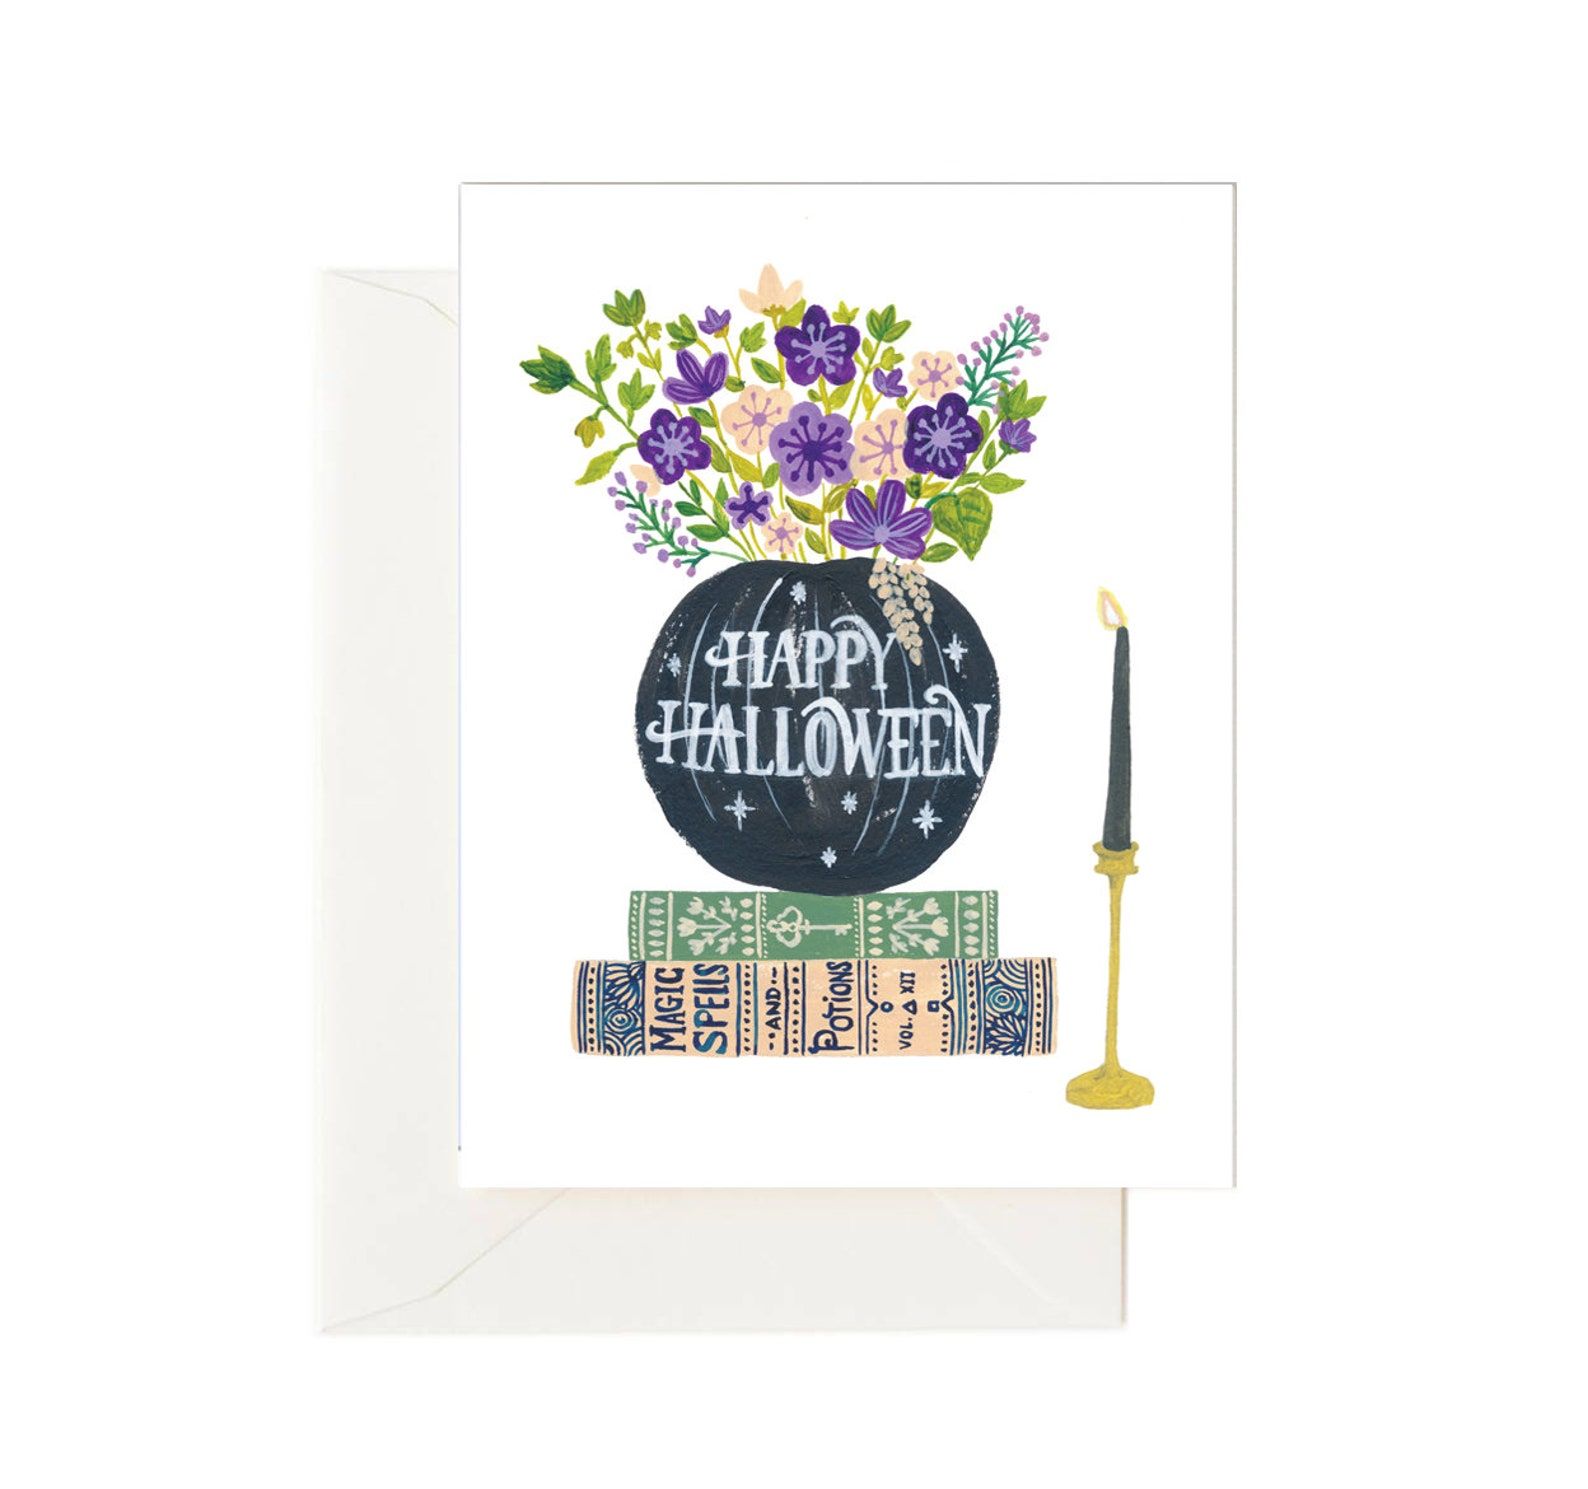 A card featuring a black pumpkin vase with green and purple flowers on a stack of books, with a black candle.